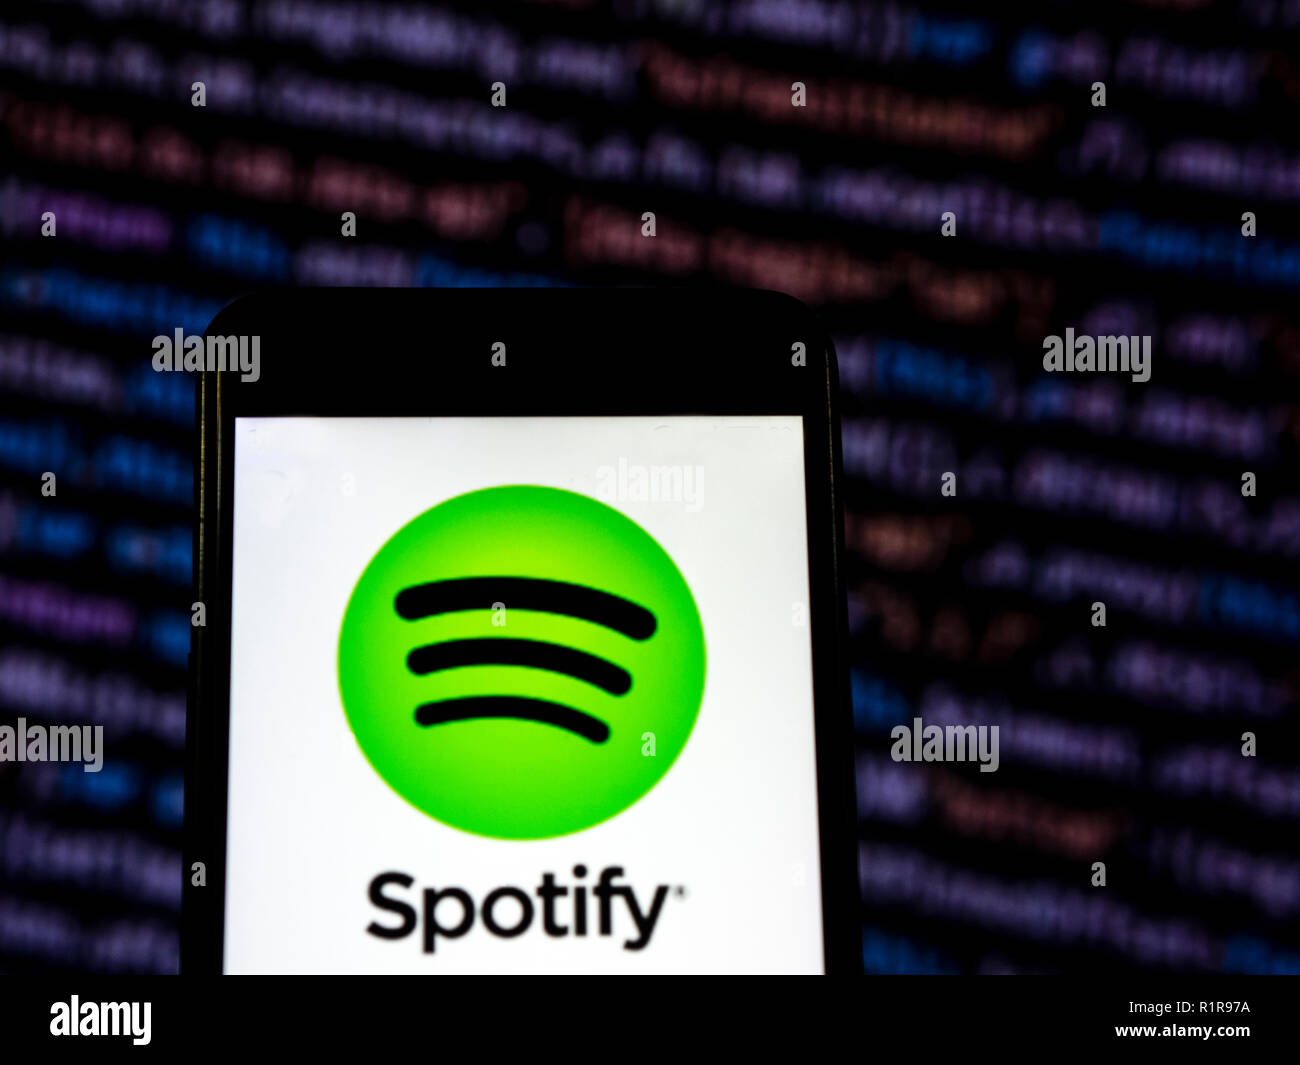 Spotify logo seen displayed on smart phone. Spotify Technology S.A. is a music streaming service developed by Swedish company Spotify Technology, which is head quartered in Stockholm, Sweden Stock Photo